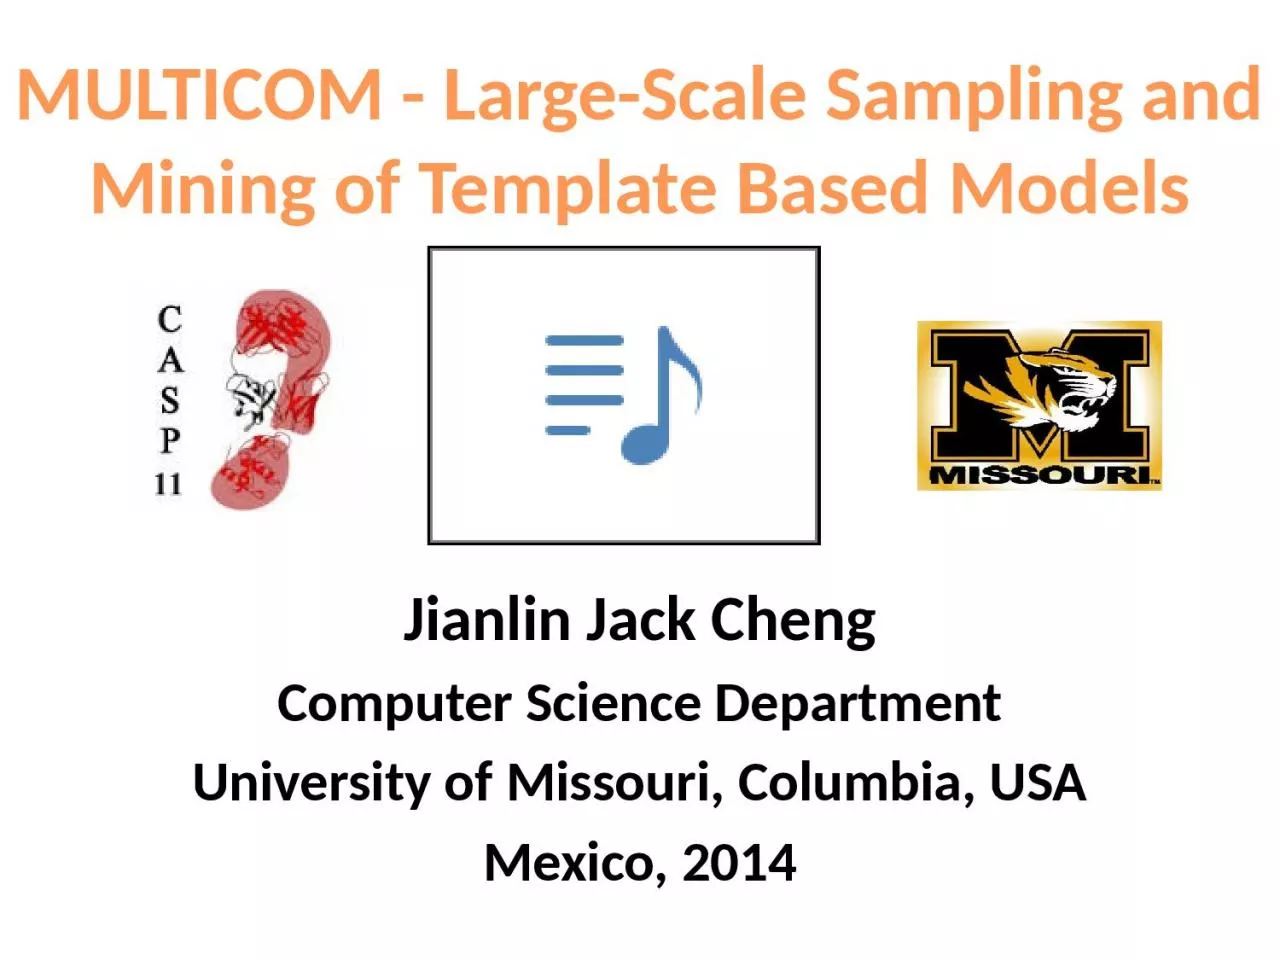 MULTICOM - Large-Scale Sampling and Mining of Template Based Models